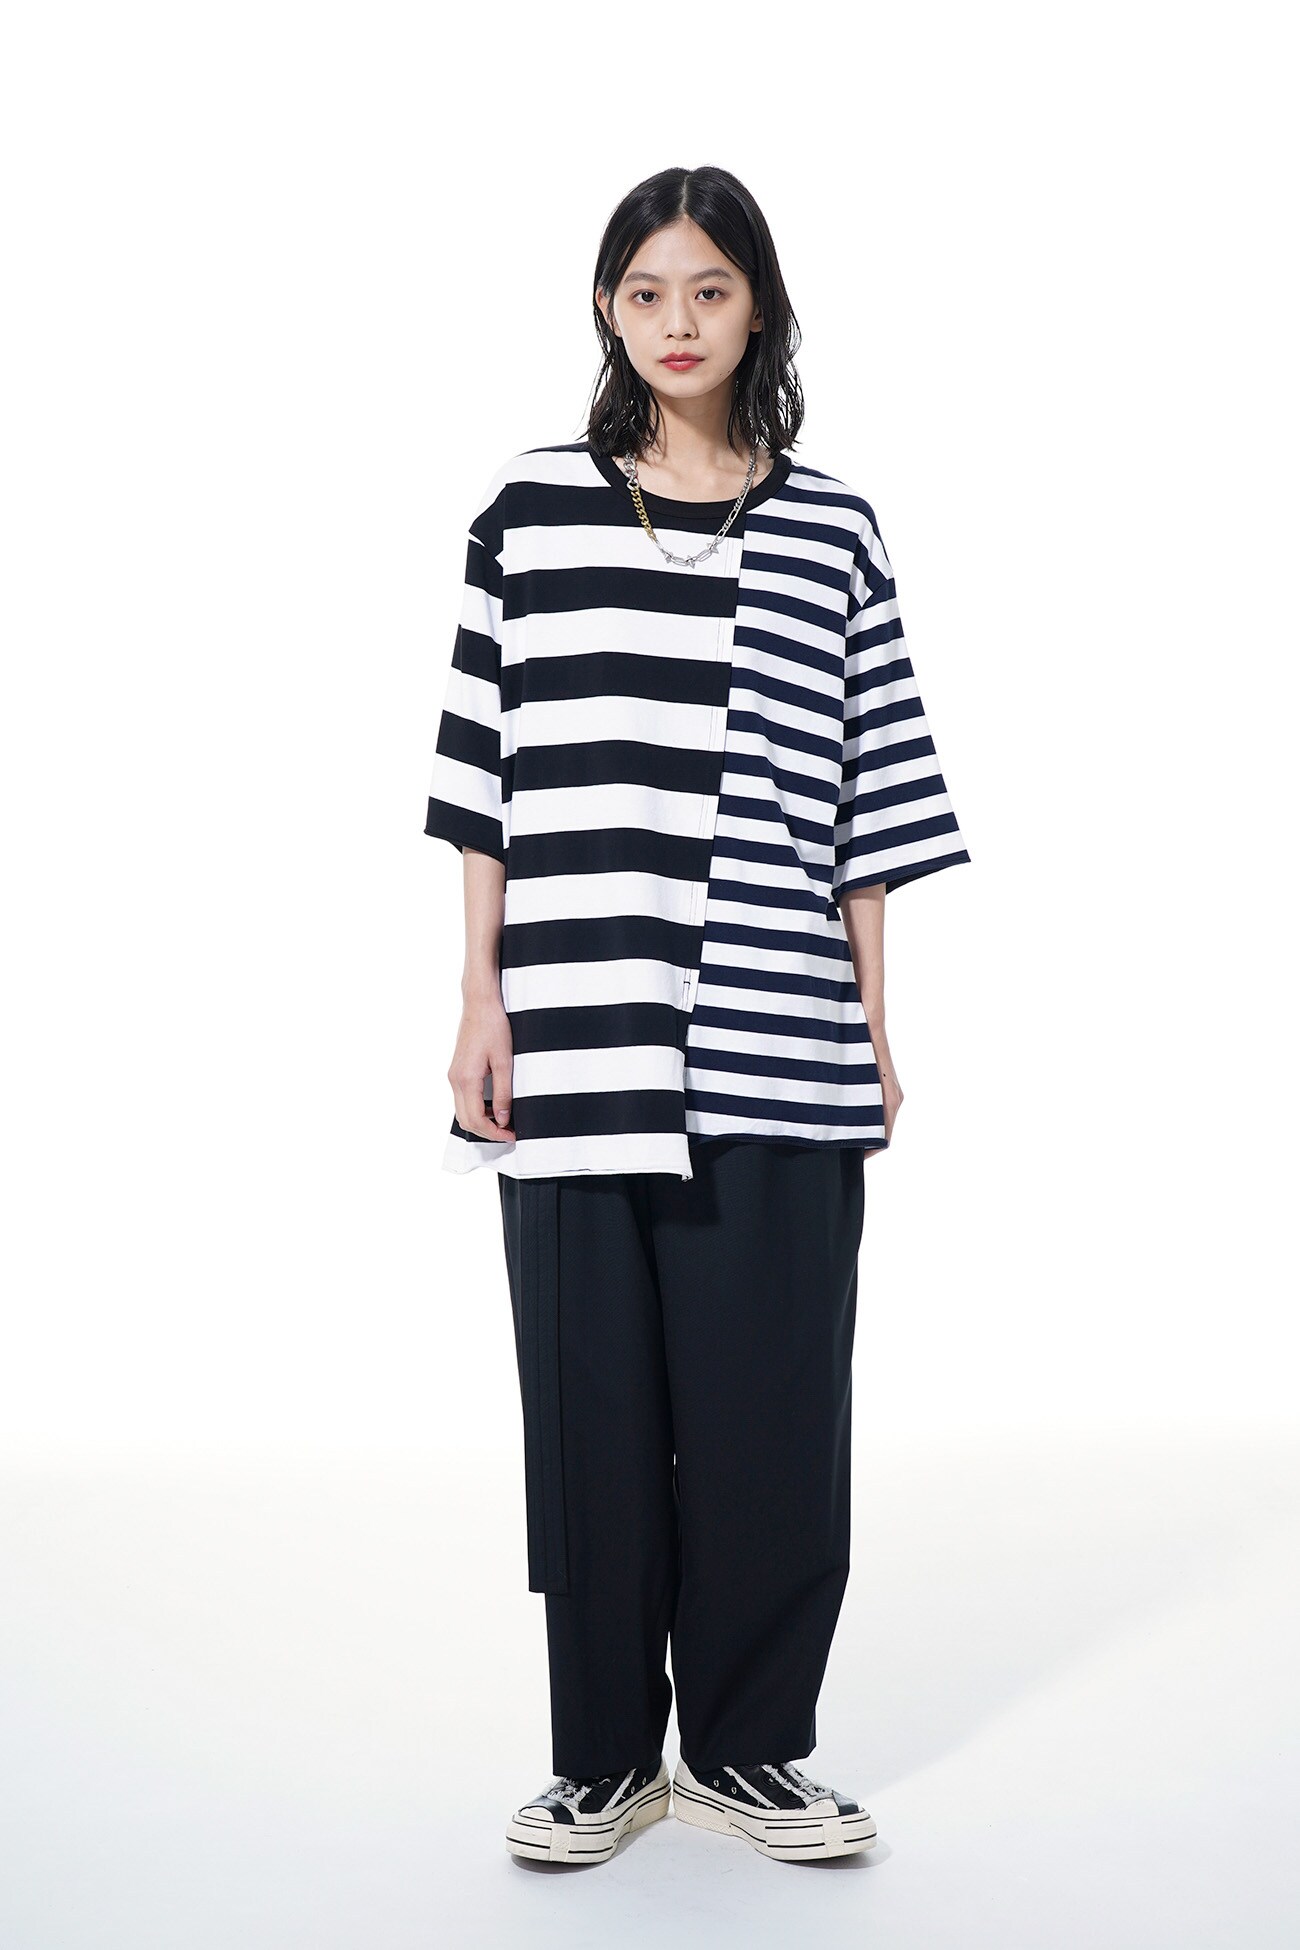 Staggered Horizontal Stripes Asymmetry T-Shirts